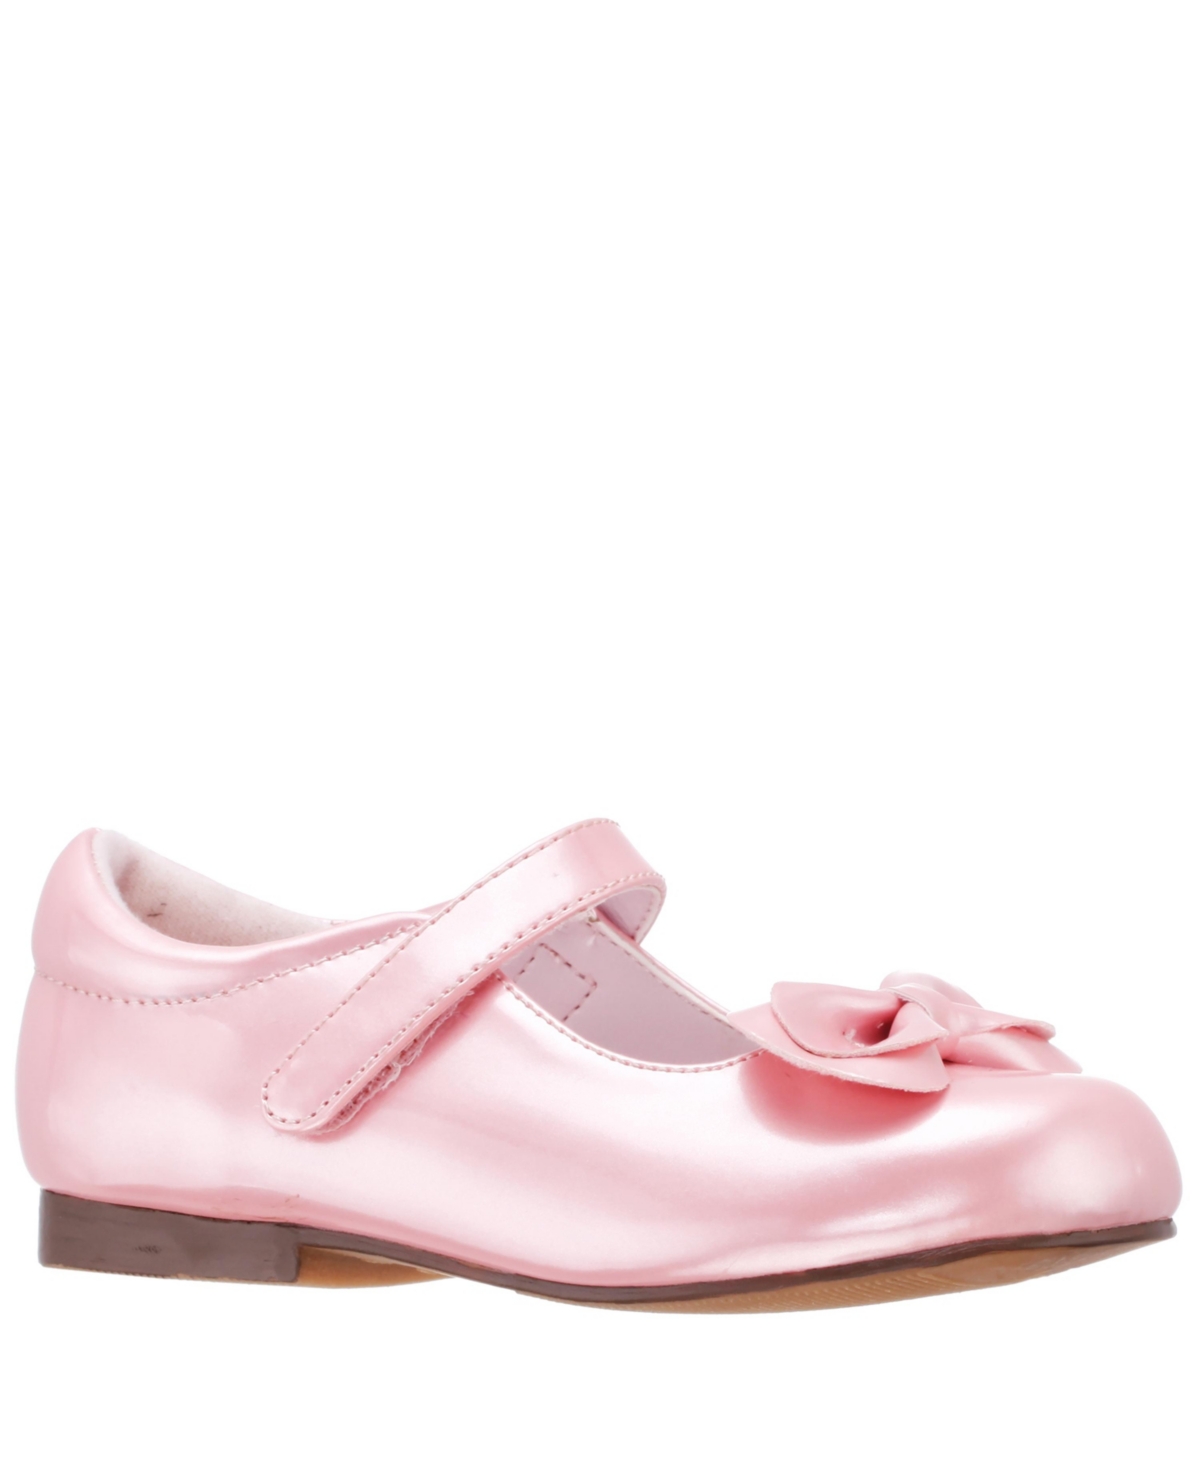 Shop Nina Toddler Girls Krista Patent Mary Jane Dress Shoes In Blush Pearlized Patent